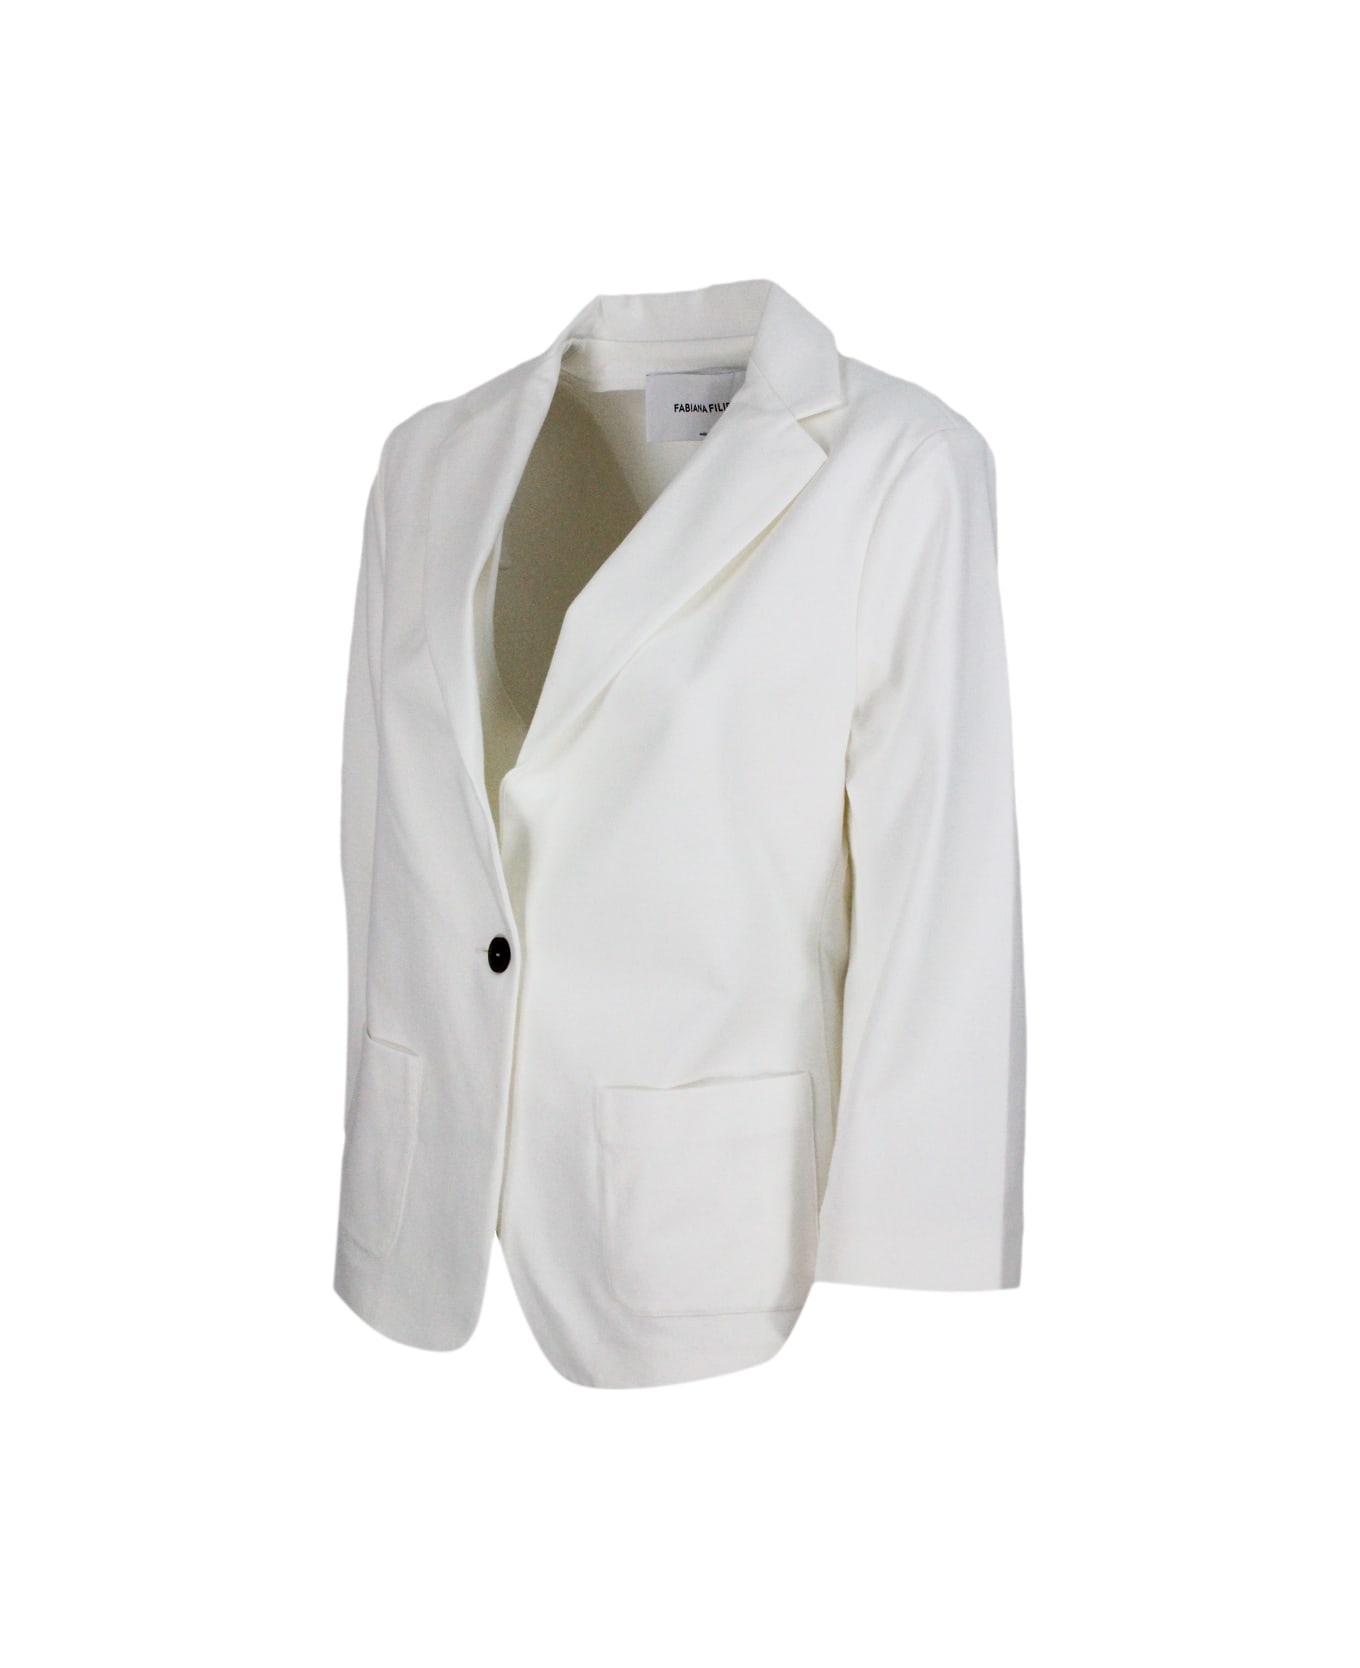 Fabiana Filippi Single-breasted Blazer Jacket In Stretch Cotton Jersey With Three-quarter Sleeves Embellished With Sparkling Monili On The Neck - White